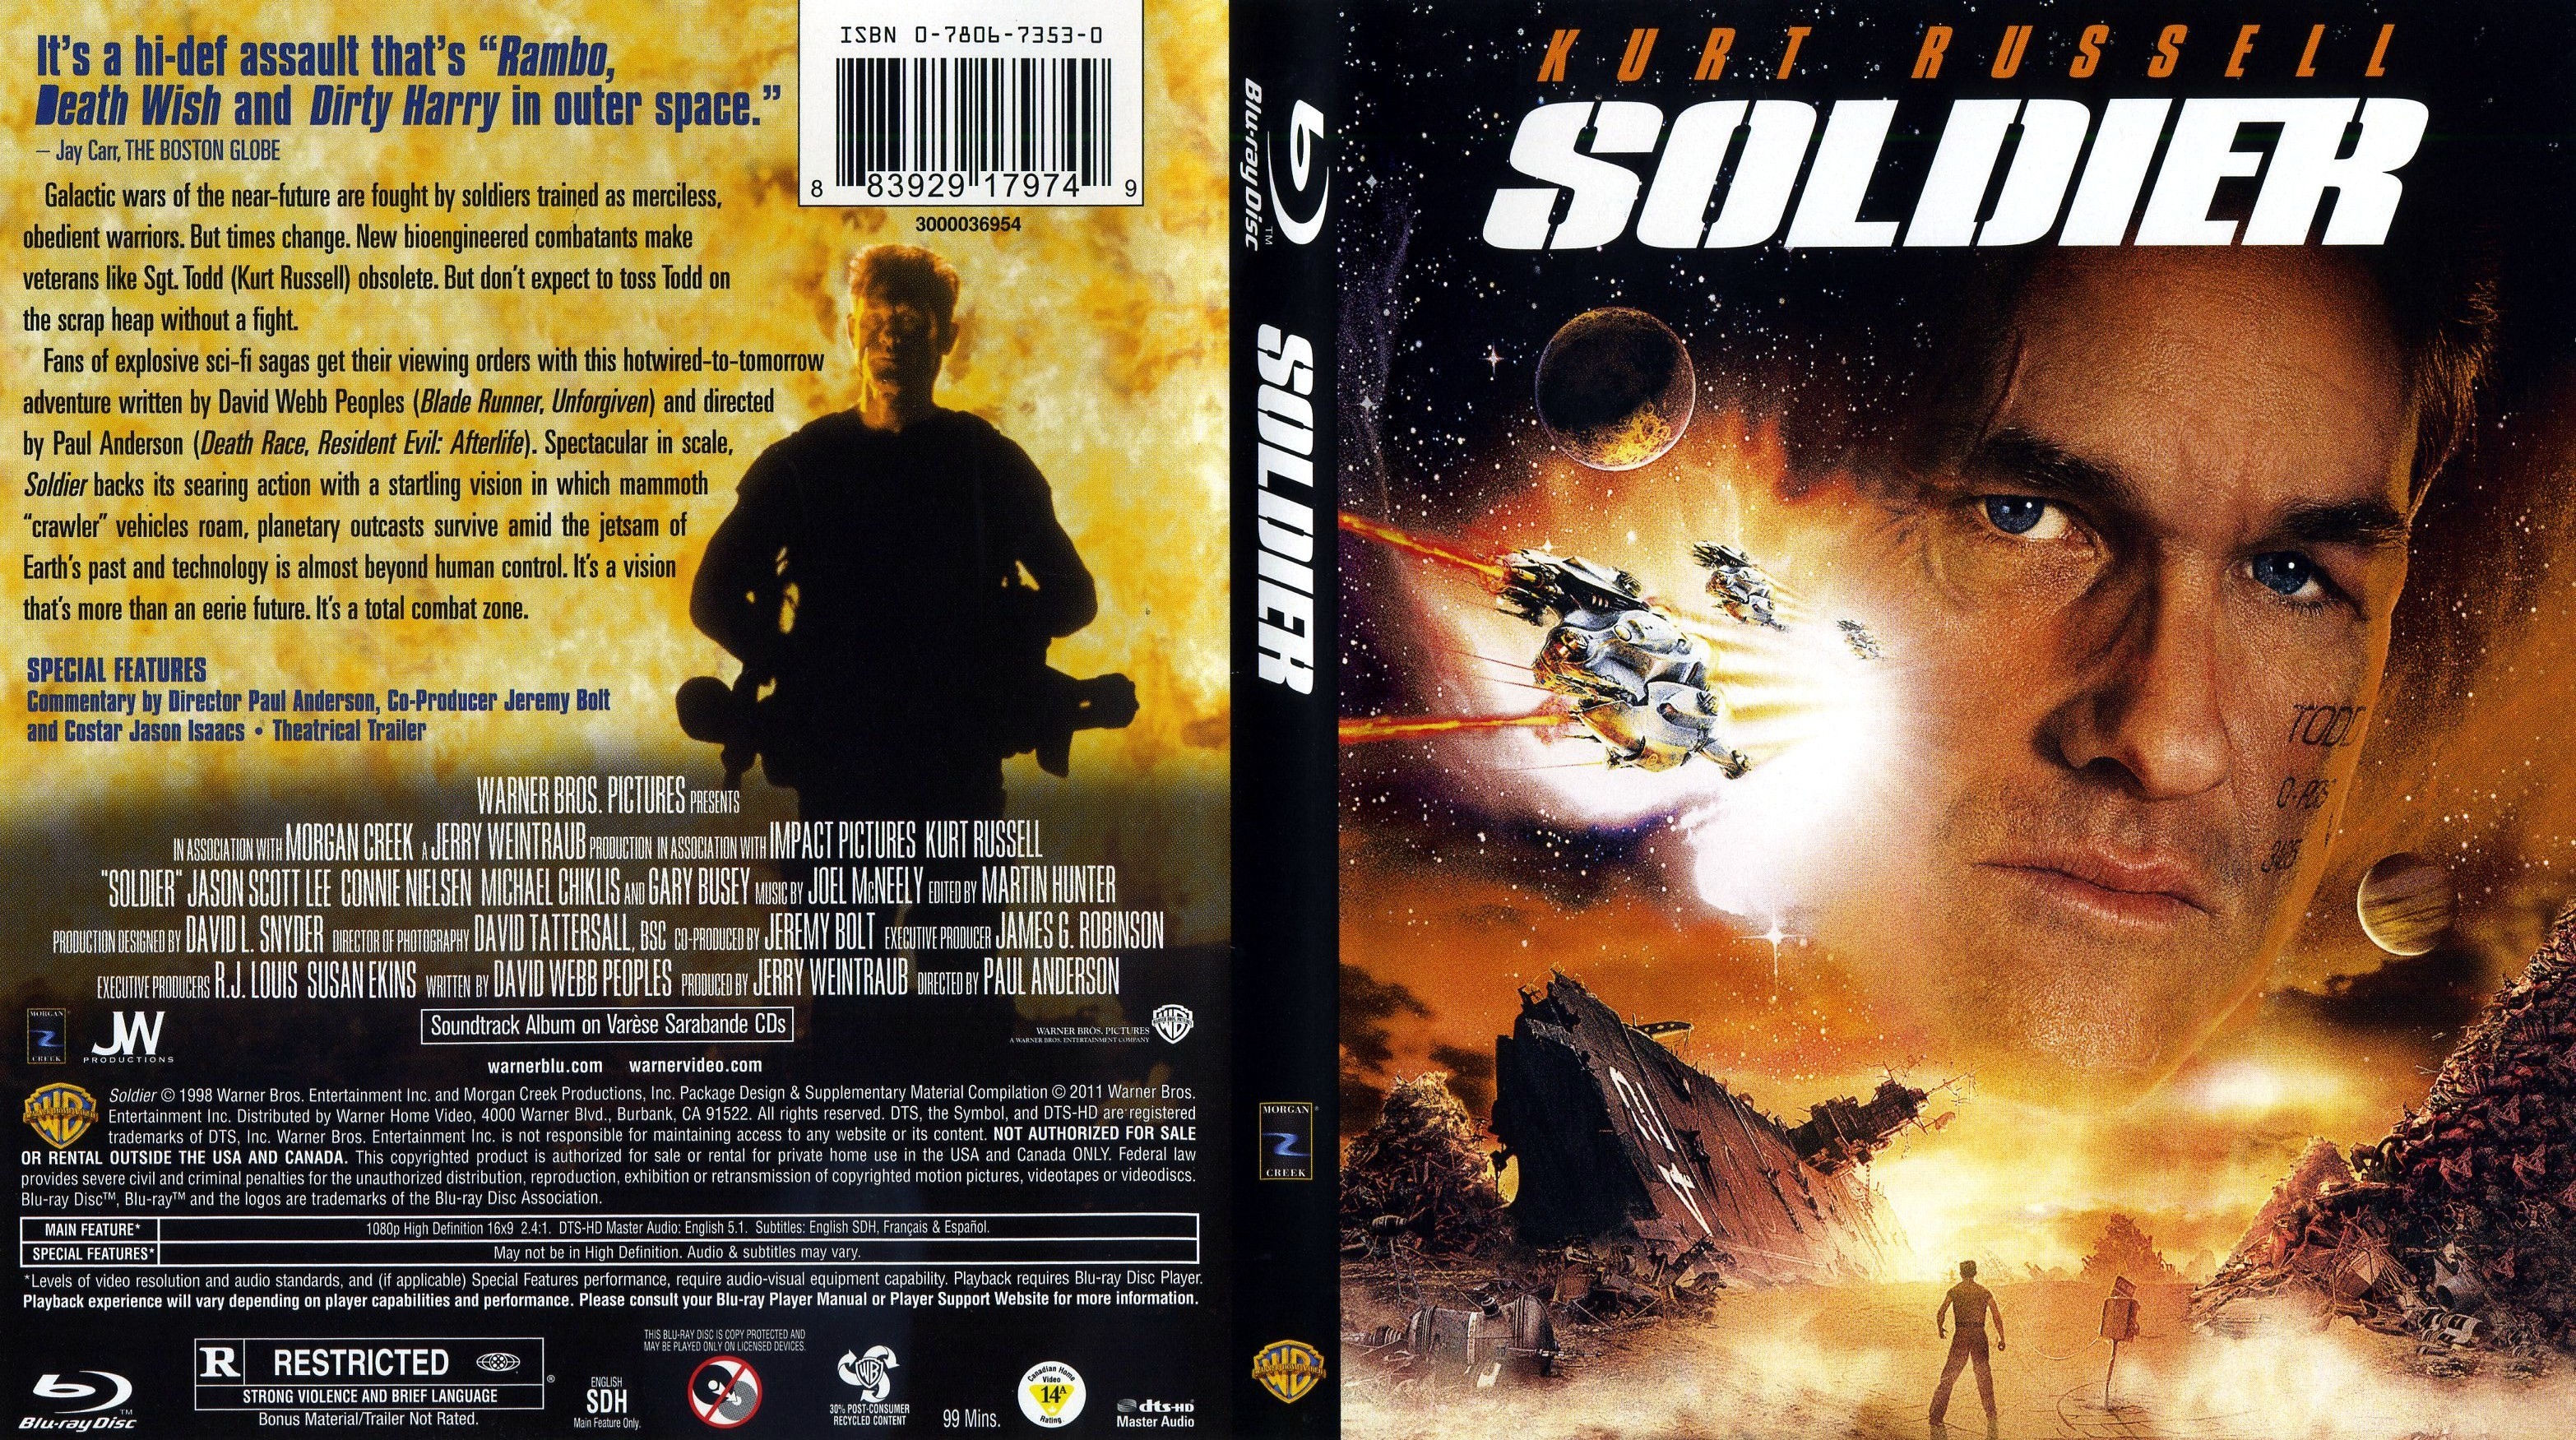 Jaquette DVD Soldier Zone 1 (BLU-RAY)